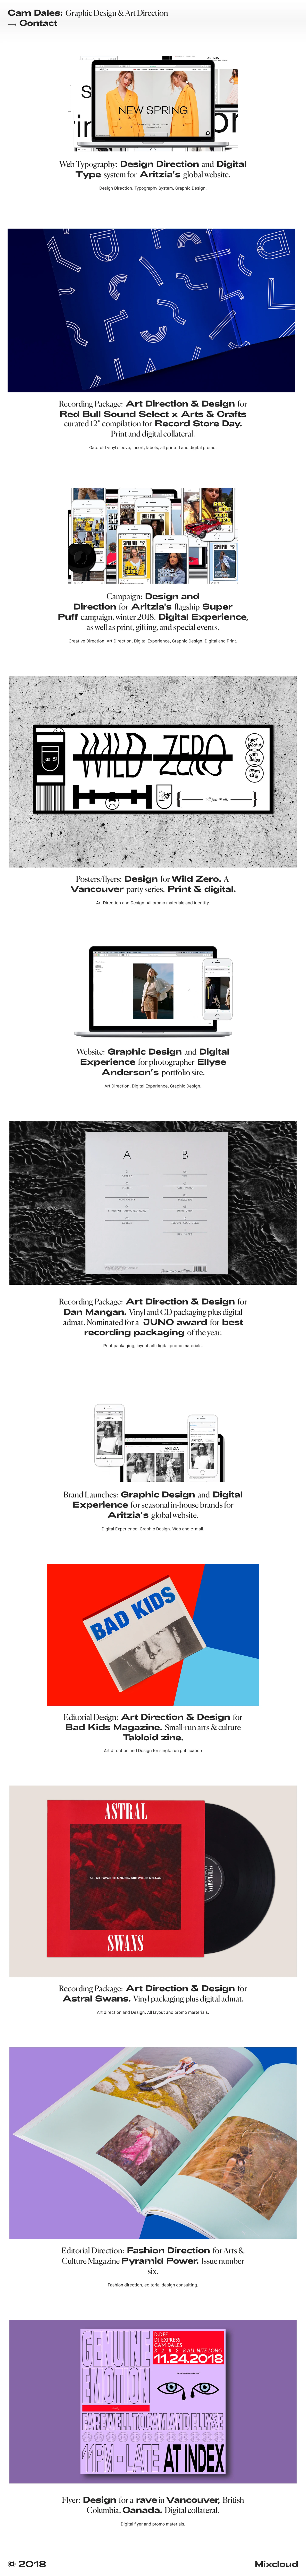 Cam Dales Landing Page Example: Graphic Design & Art Direction